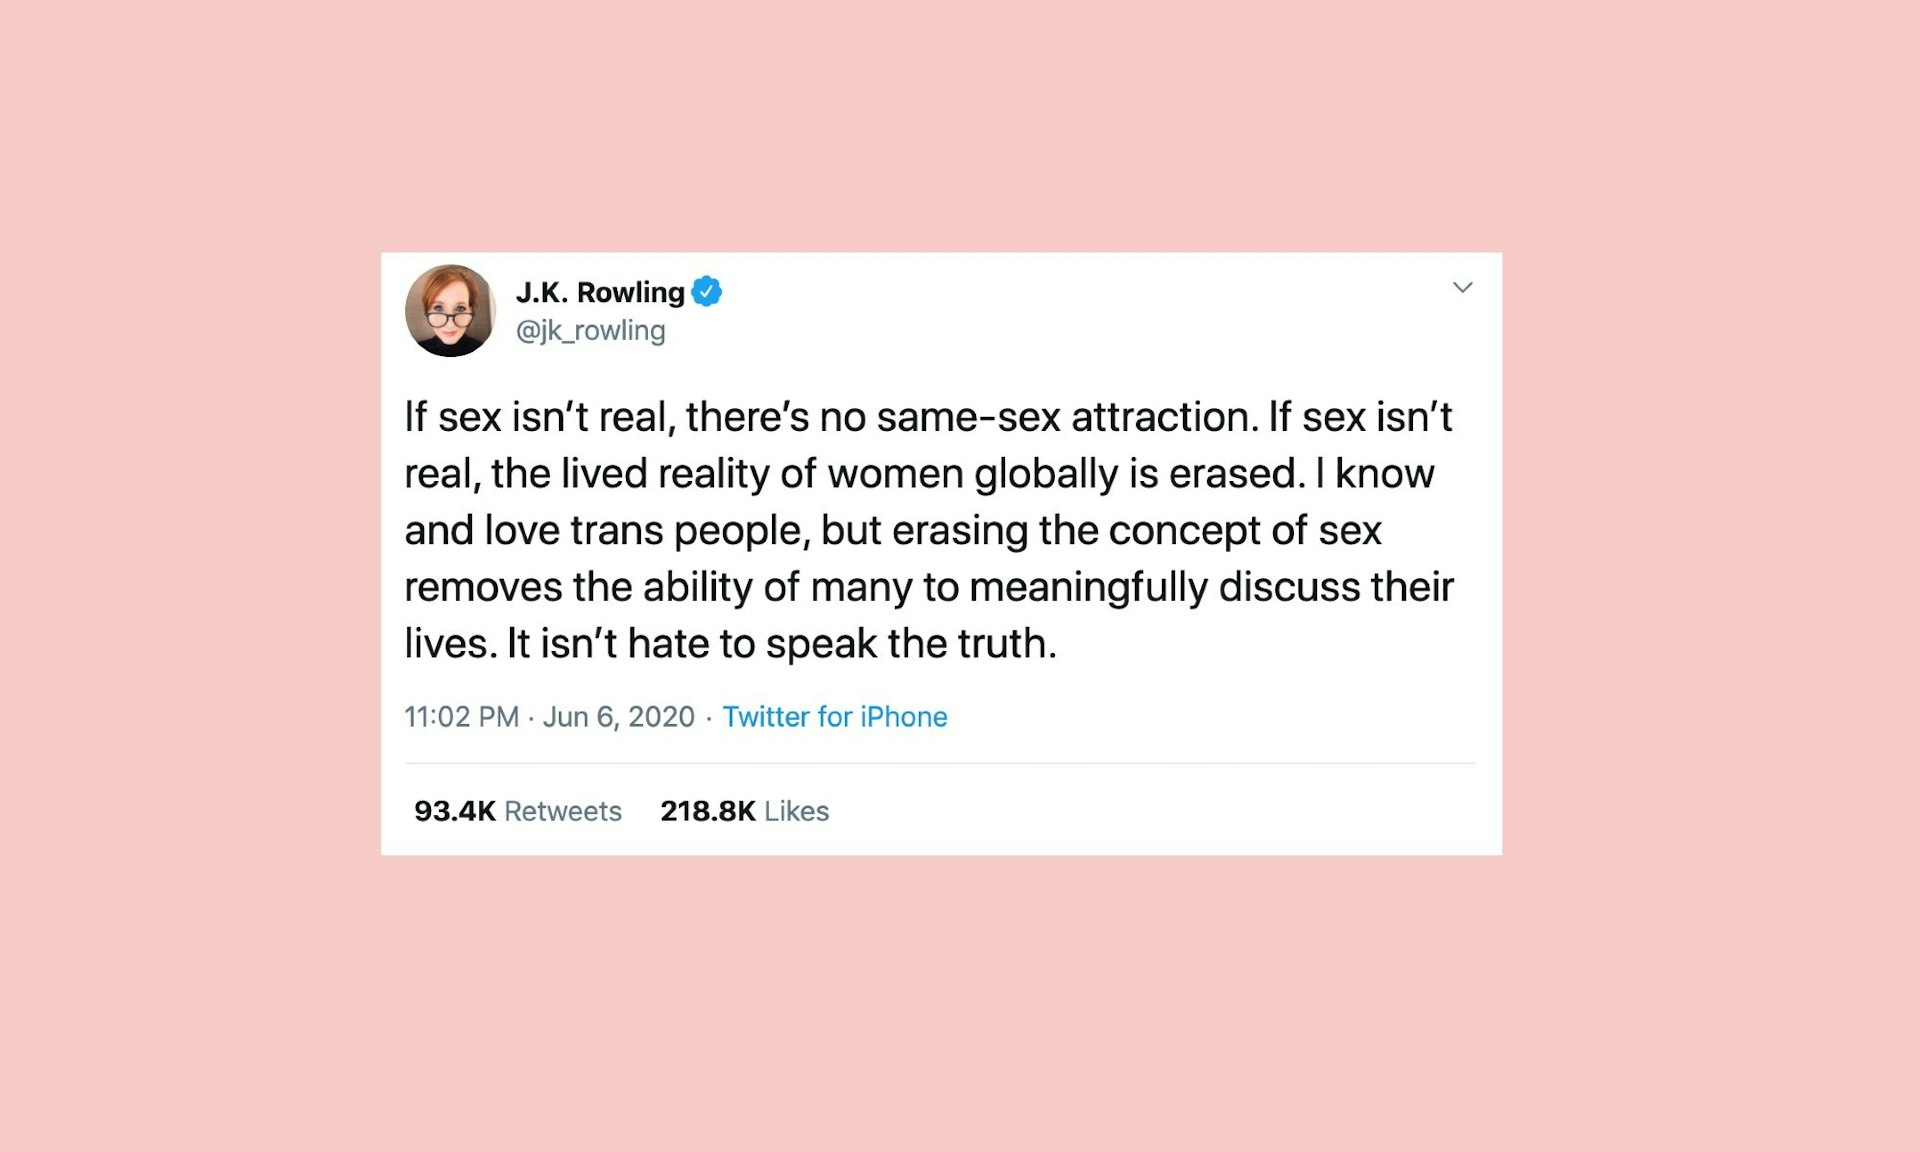 JK Rowling is not the victim here